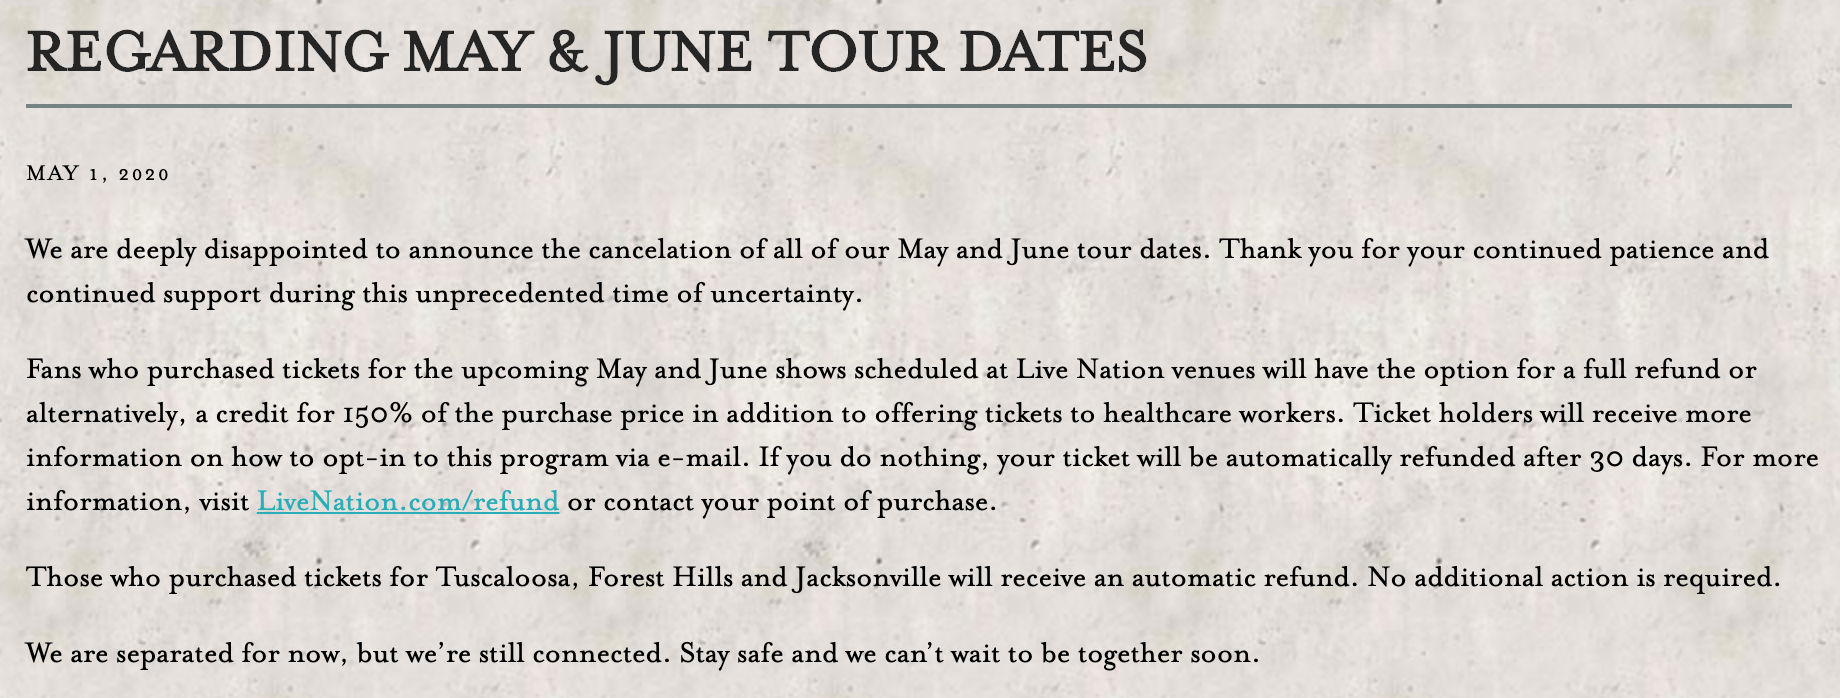 The Lumineers Tour Dates Statement 